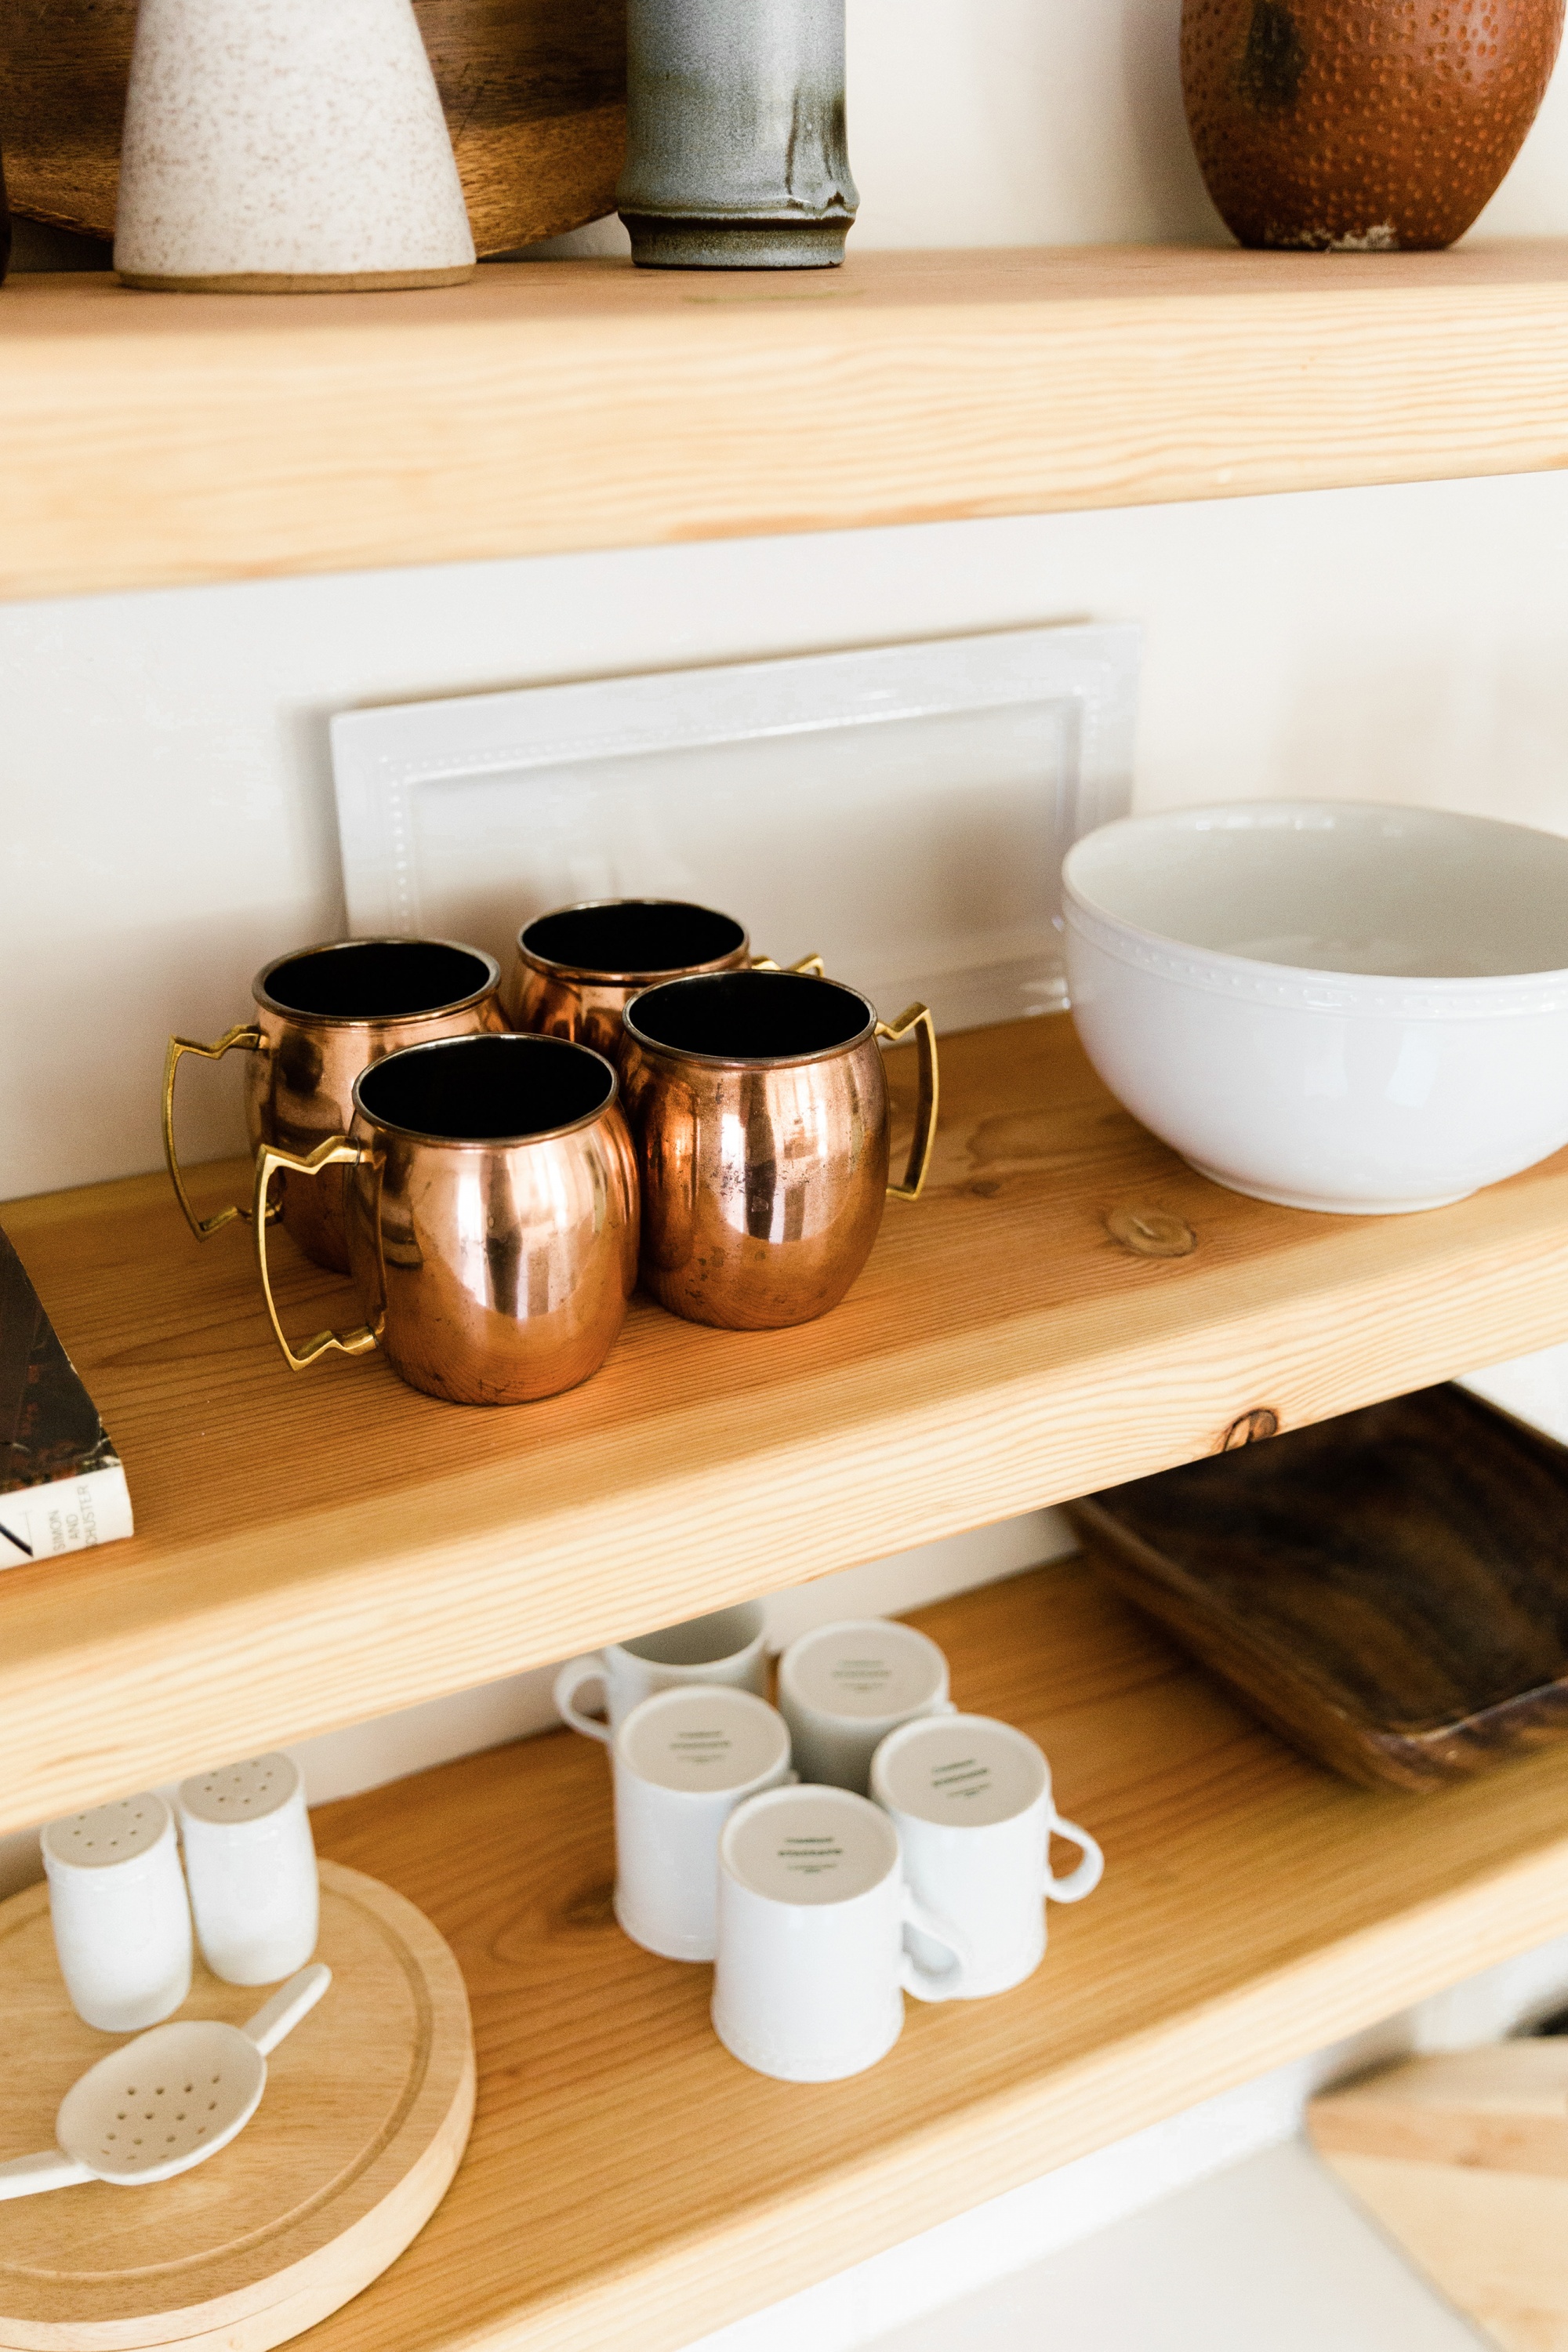 How To Style Pinterest-Worthy Floating Kitchen Shelves mugs and bowls on a shelf